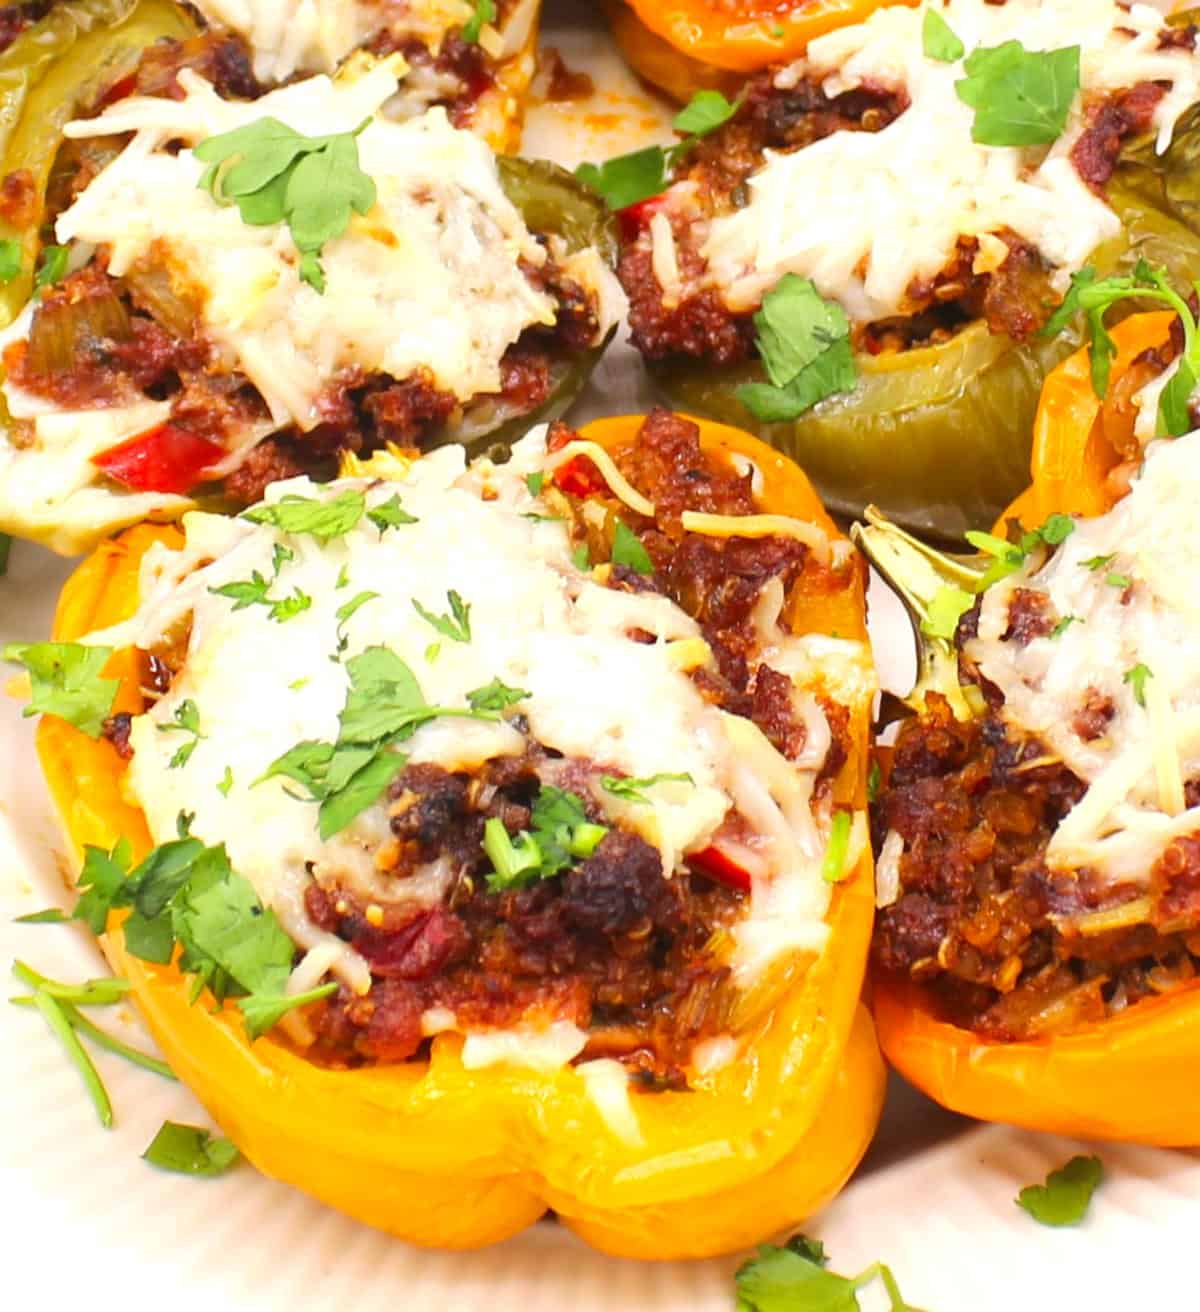 Stuffed bell peppers with vegan cheese and parsley garnish.